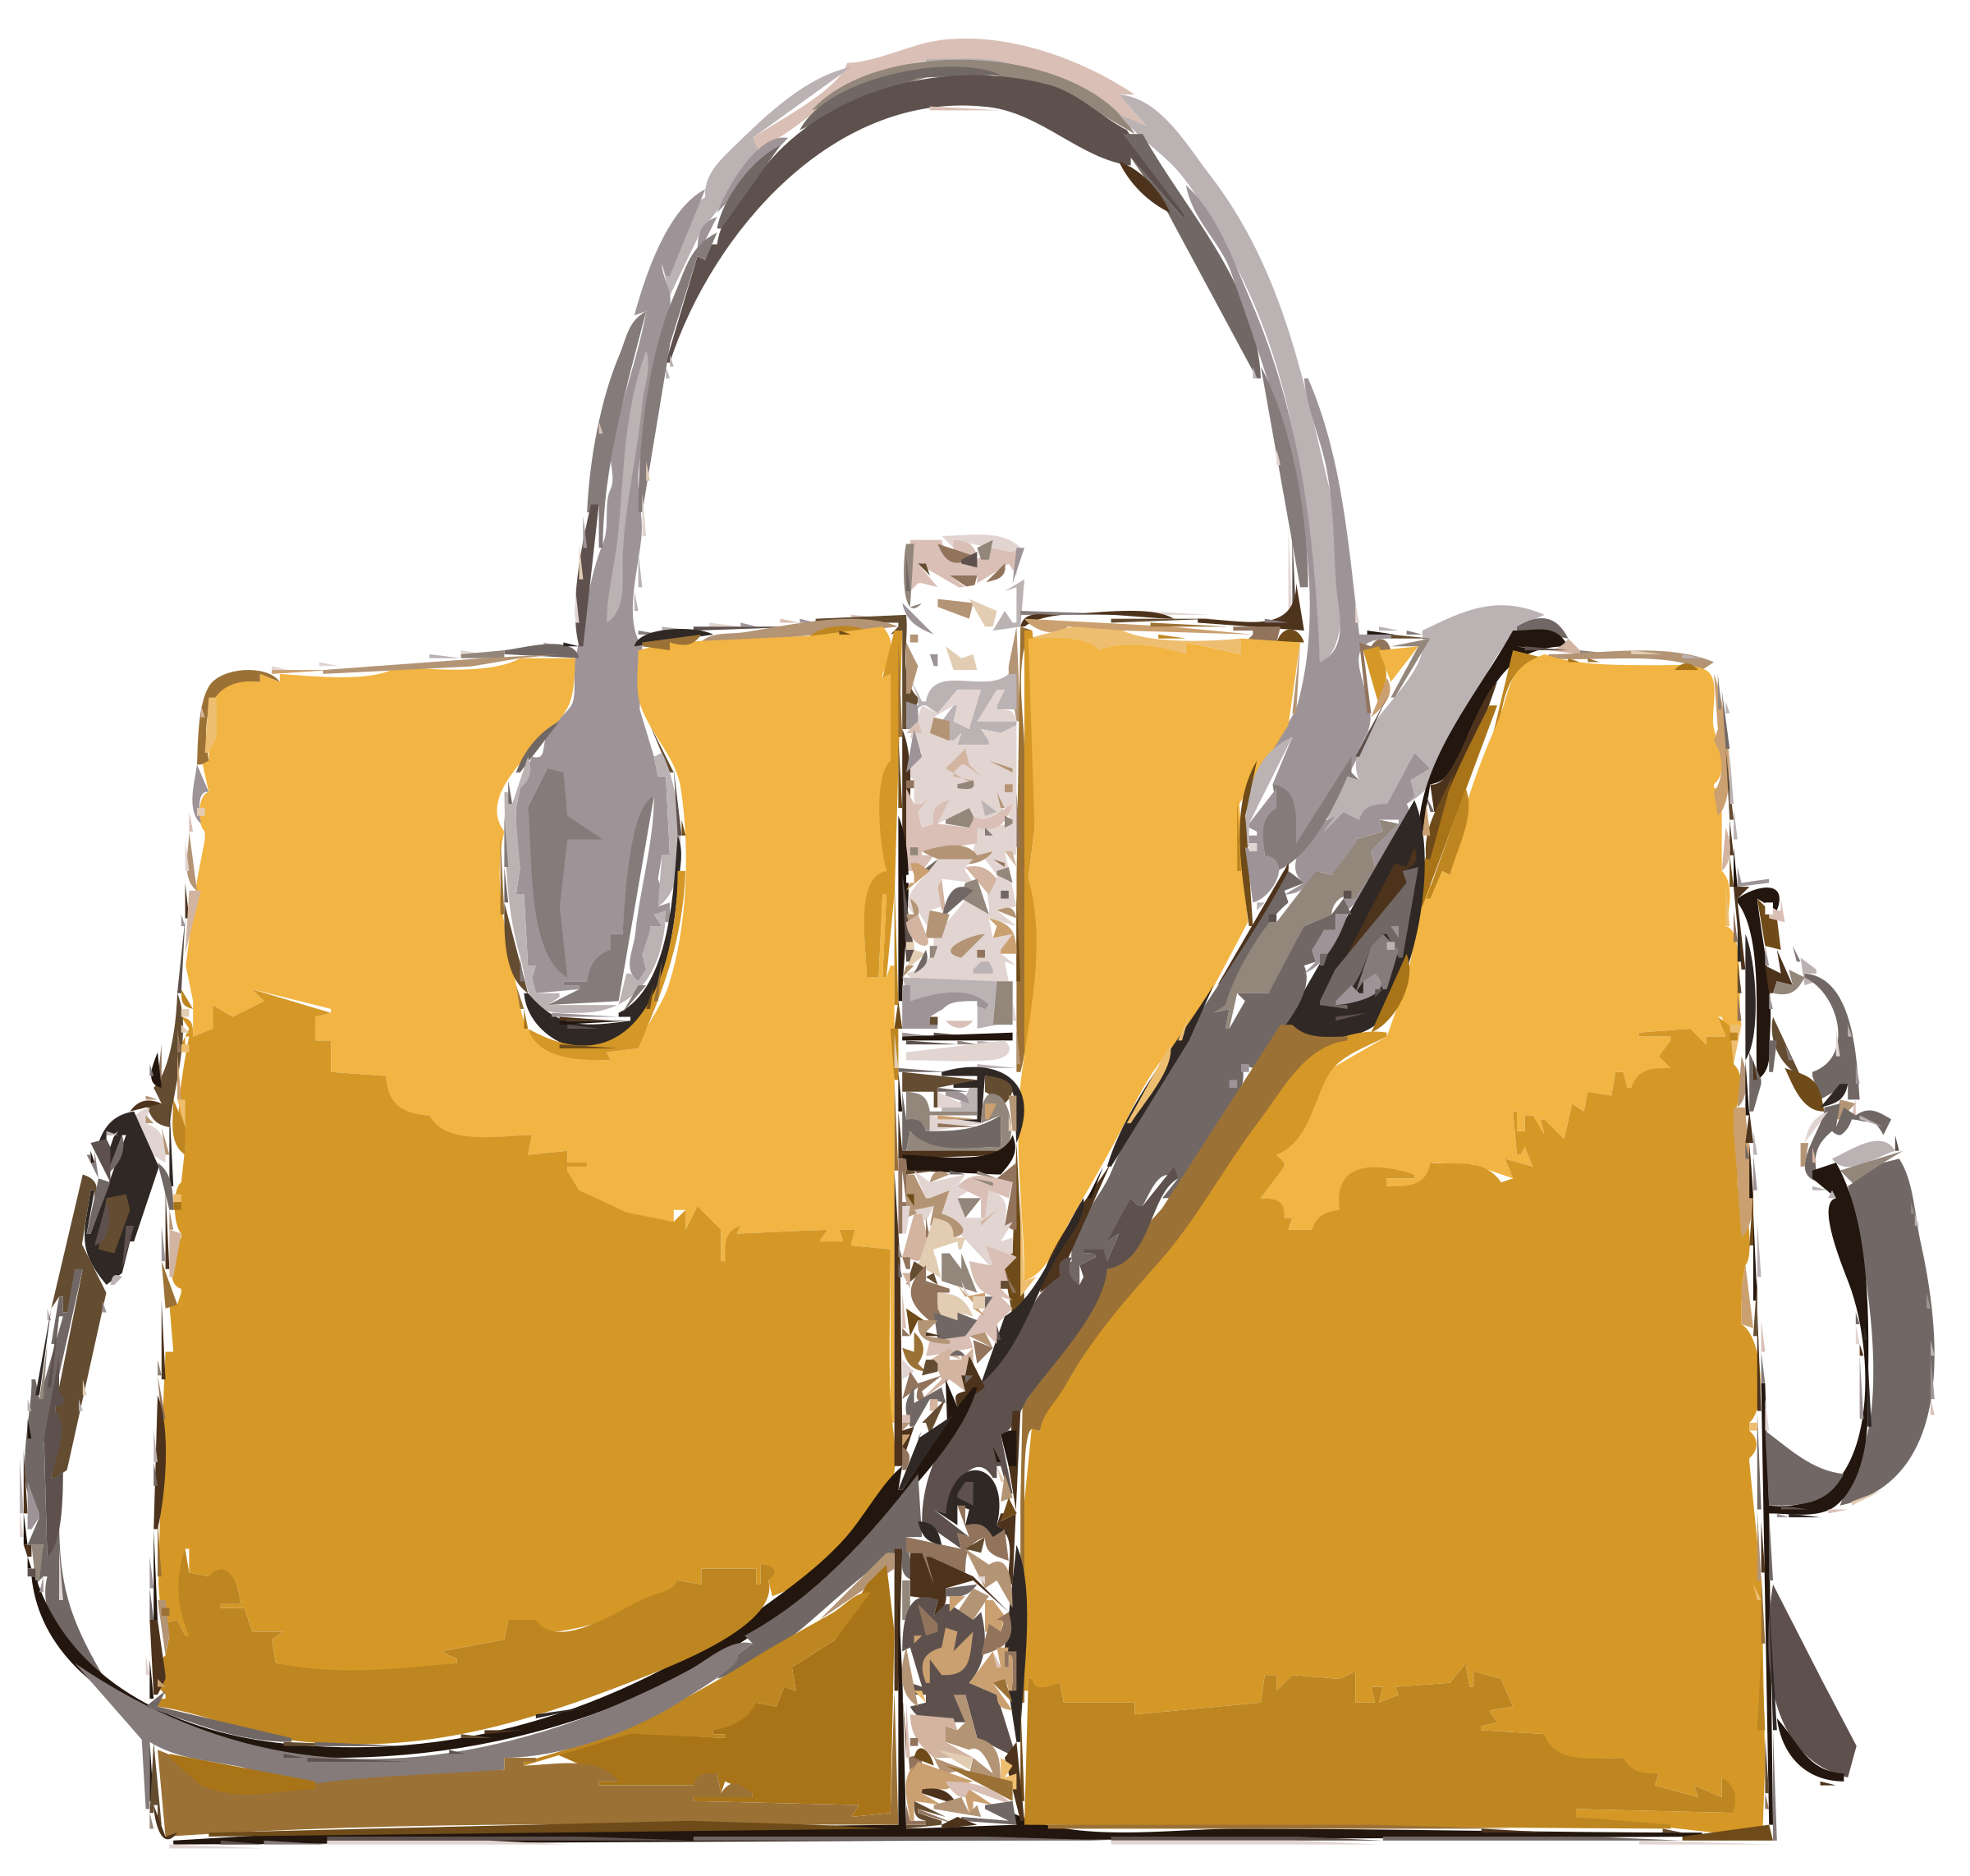 Yellow Leather Handbag No Logo Icons PNG - Free PNG and Icons Downloads